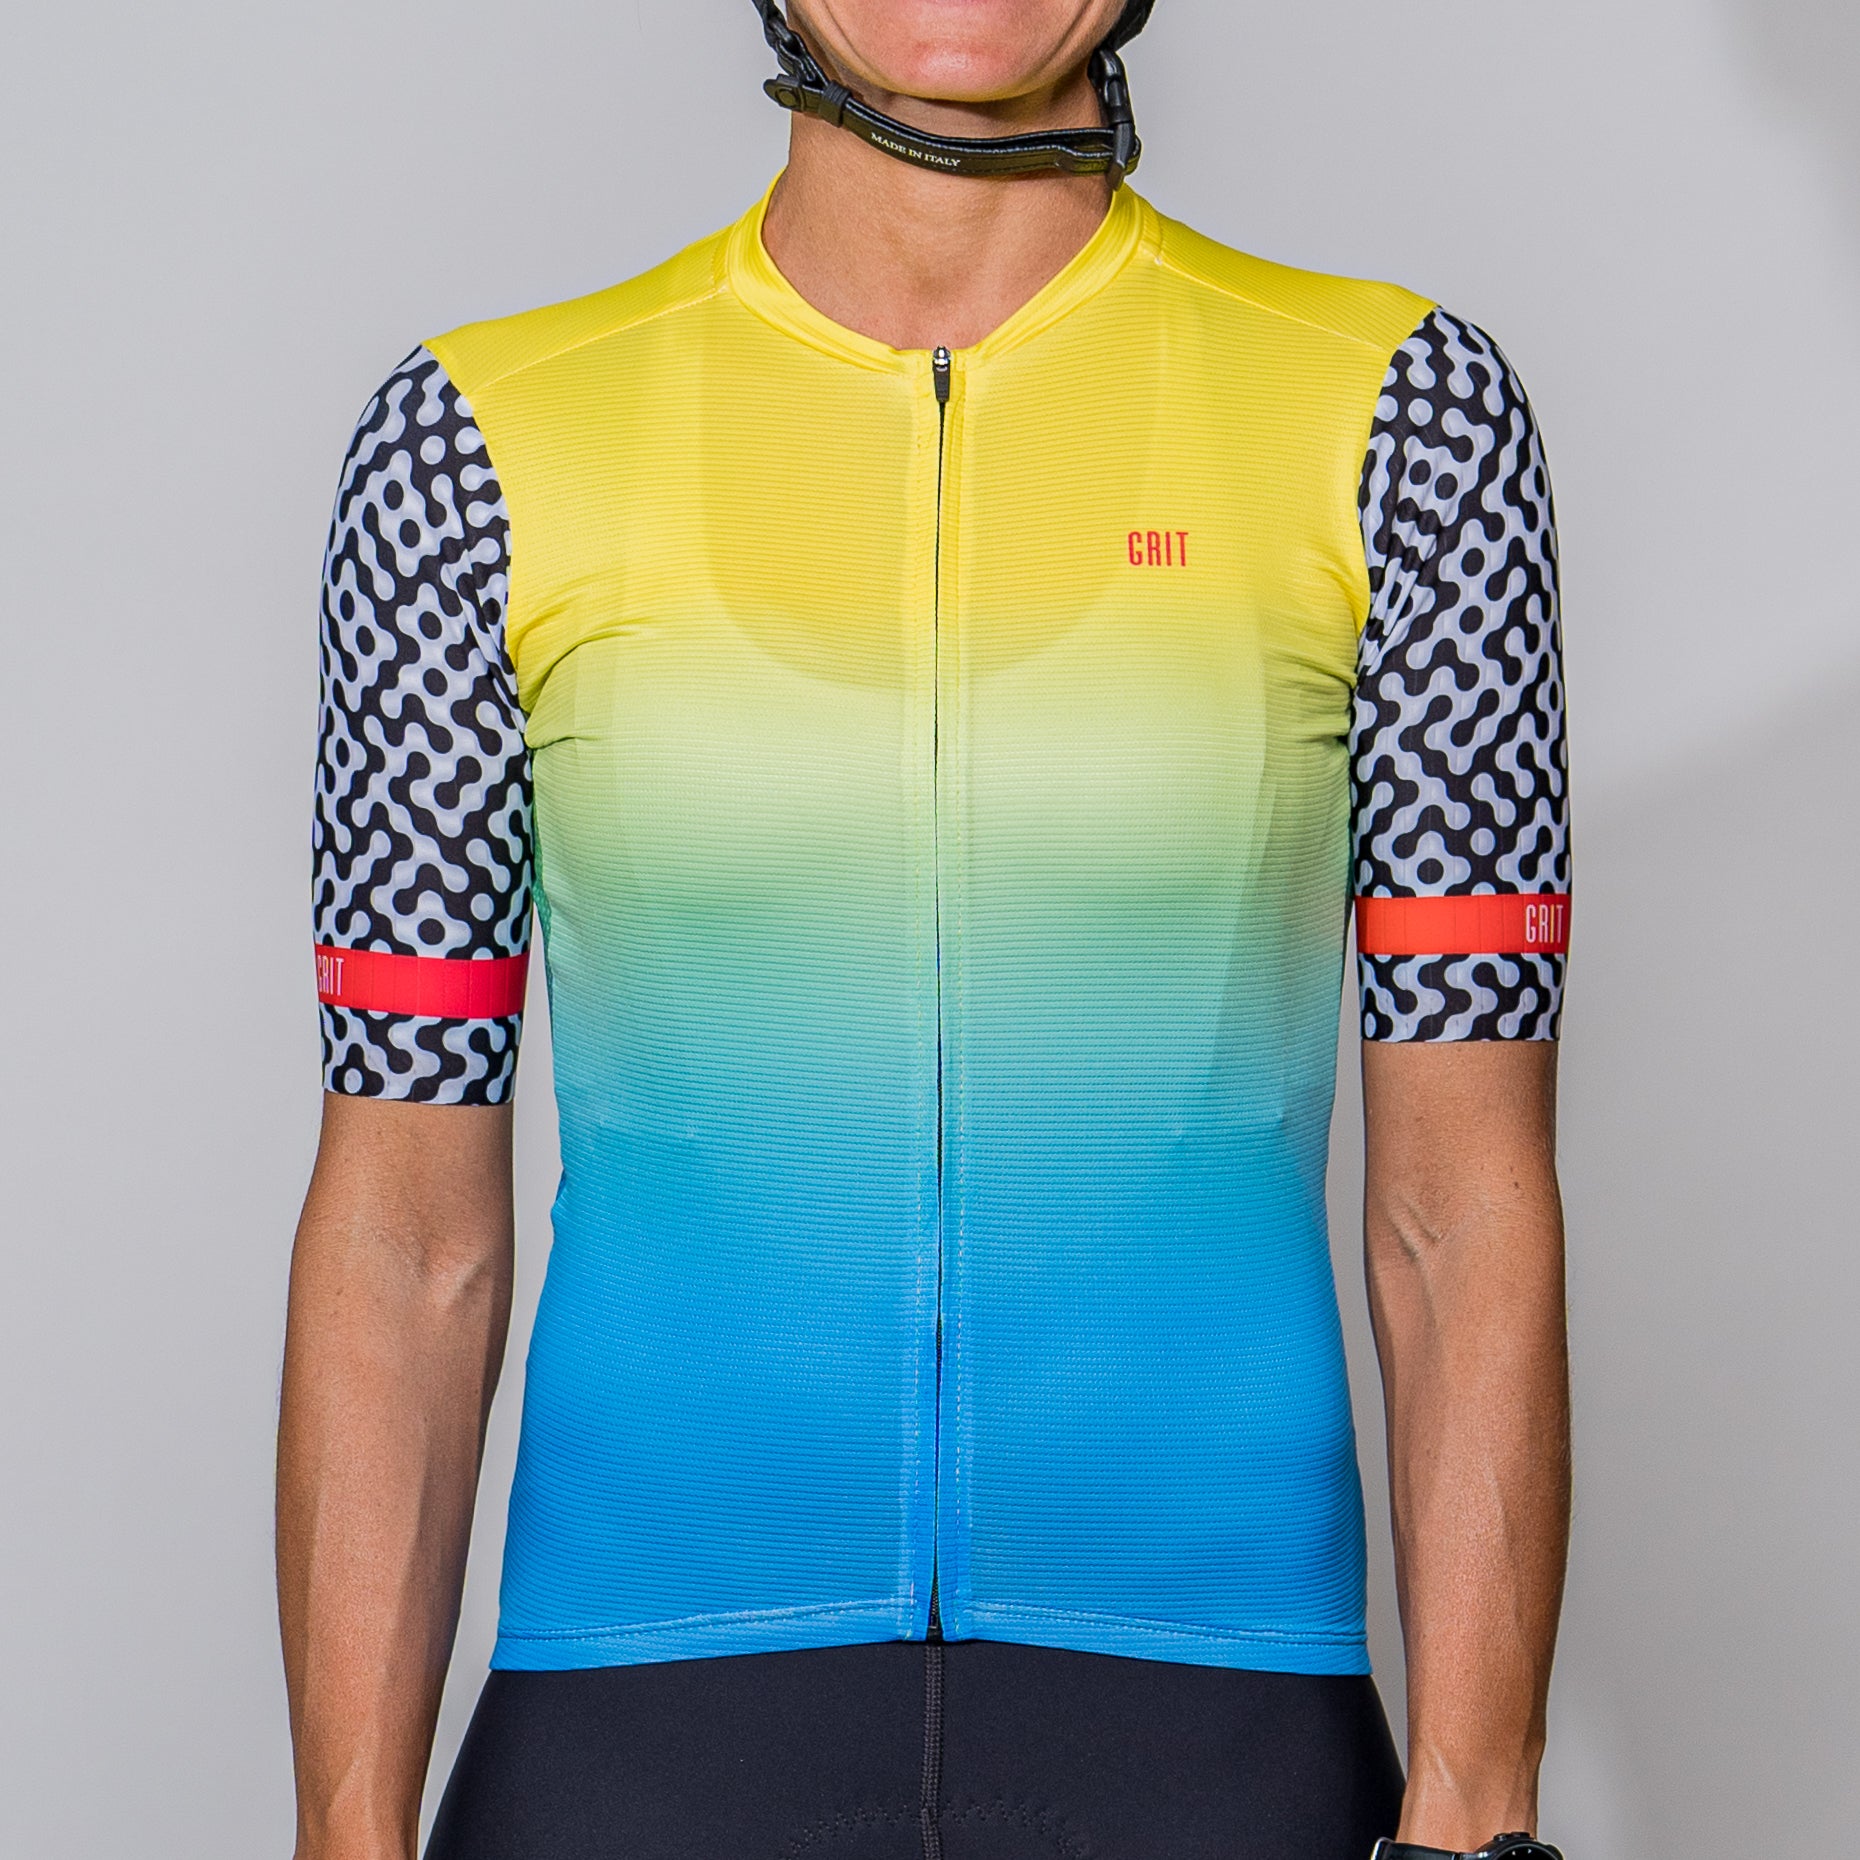 Cycling Jackets and Jerseys – grity sustainable sports apparel